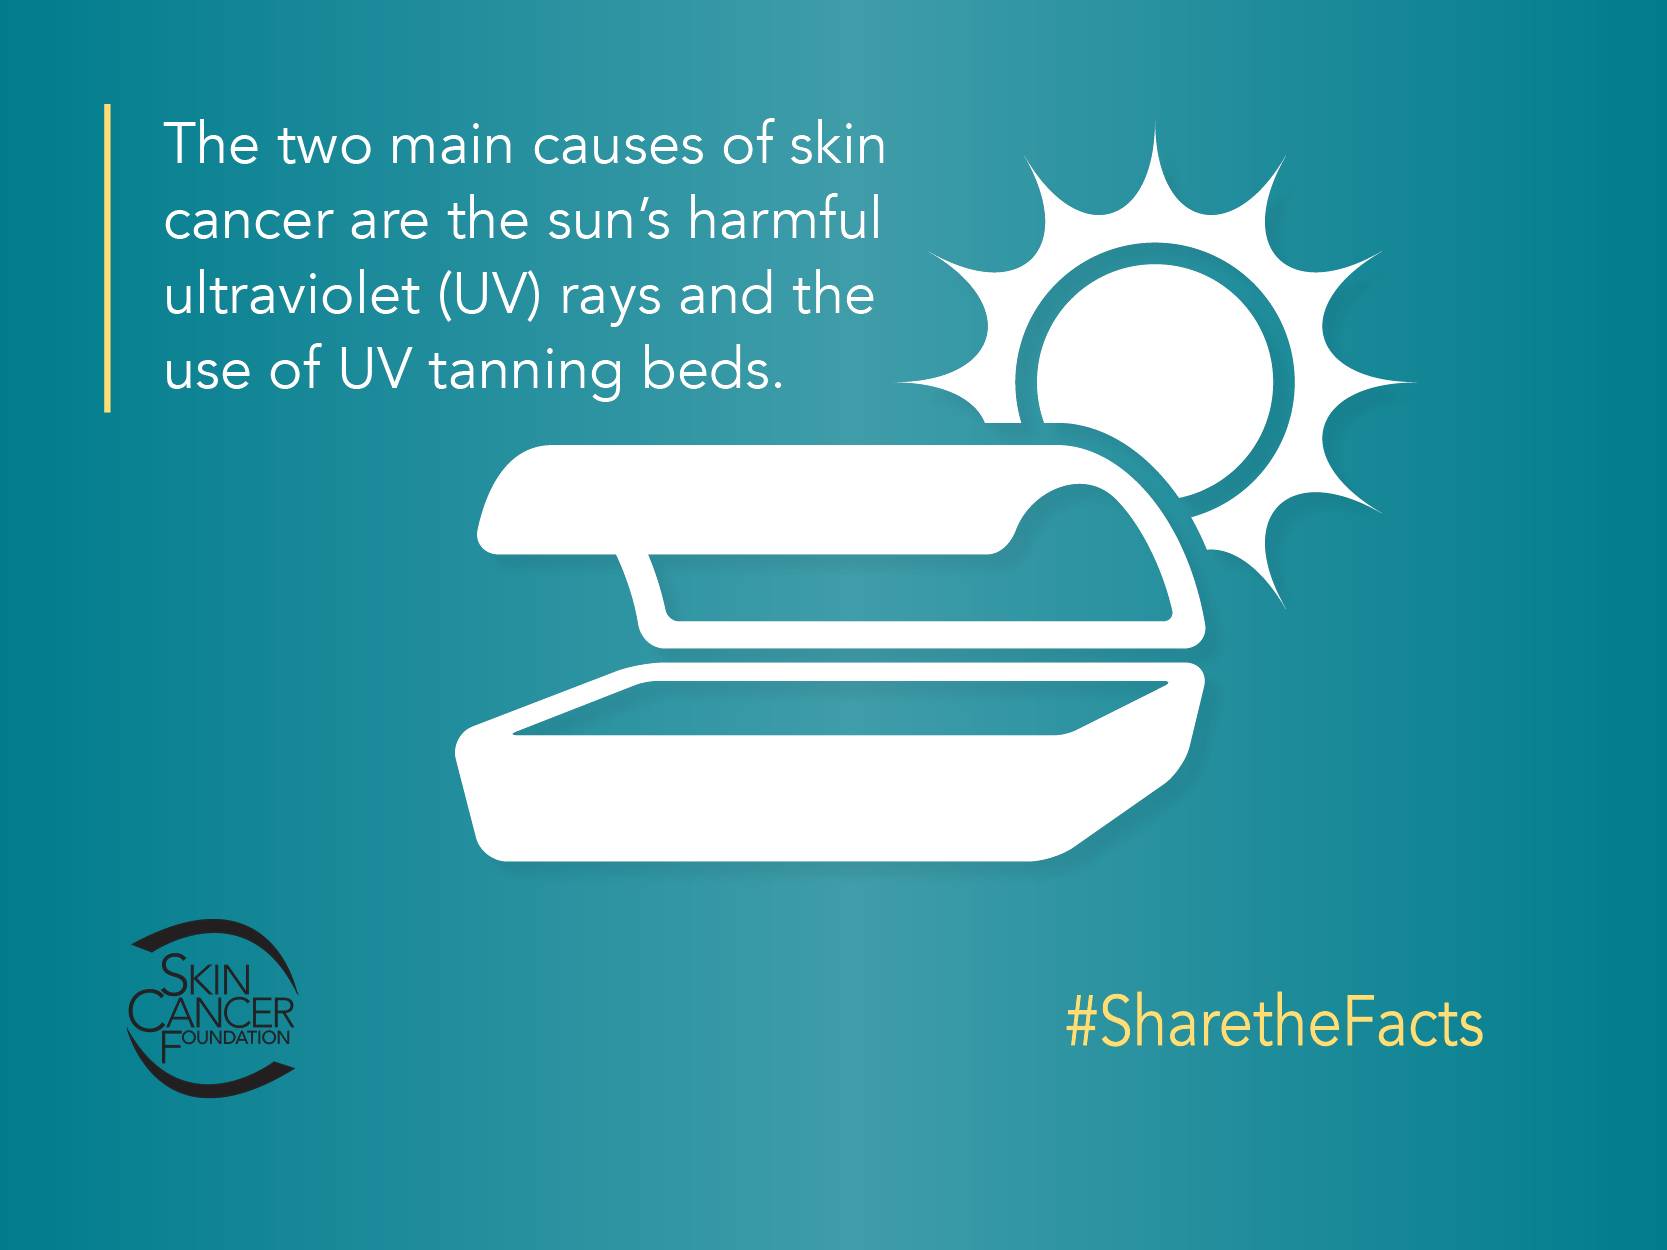 Icon of a tanning bed and sun with the words "The two main causes of skin cancer are the sun's harmful ultraviolet (UV) rays and the use of UV tanning beds. #Share the Facts"